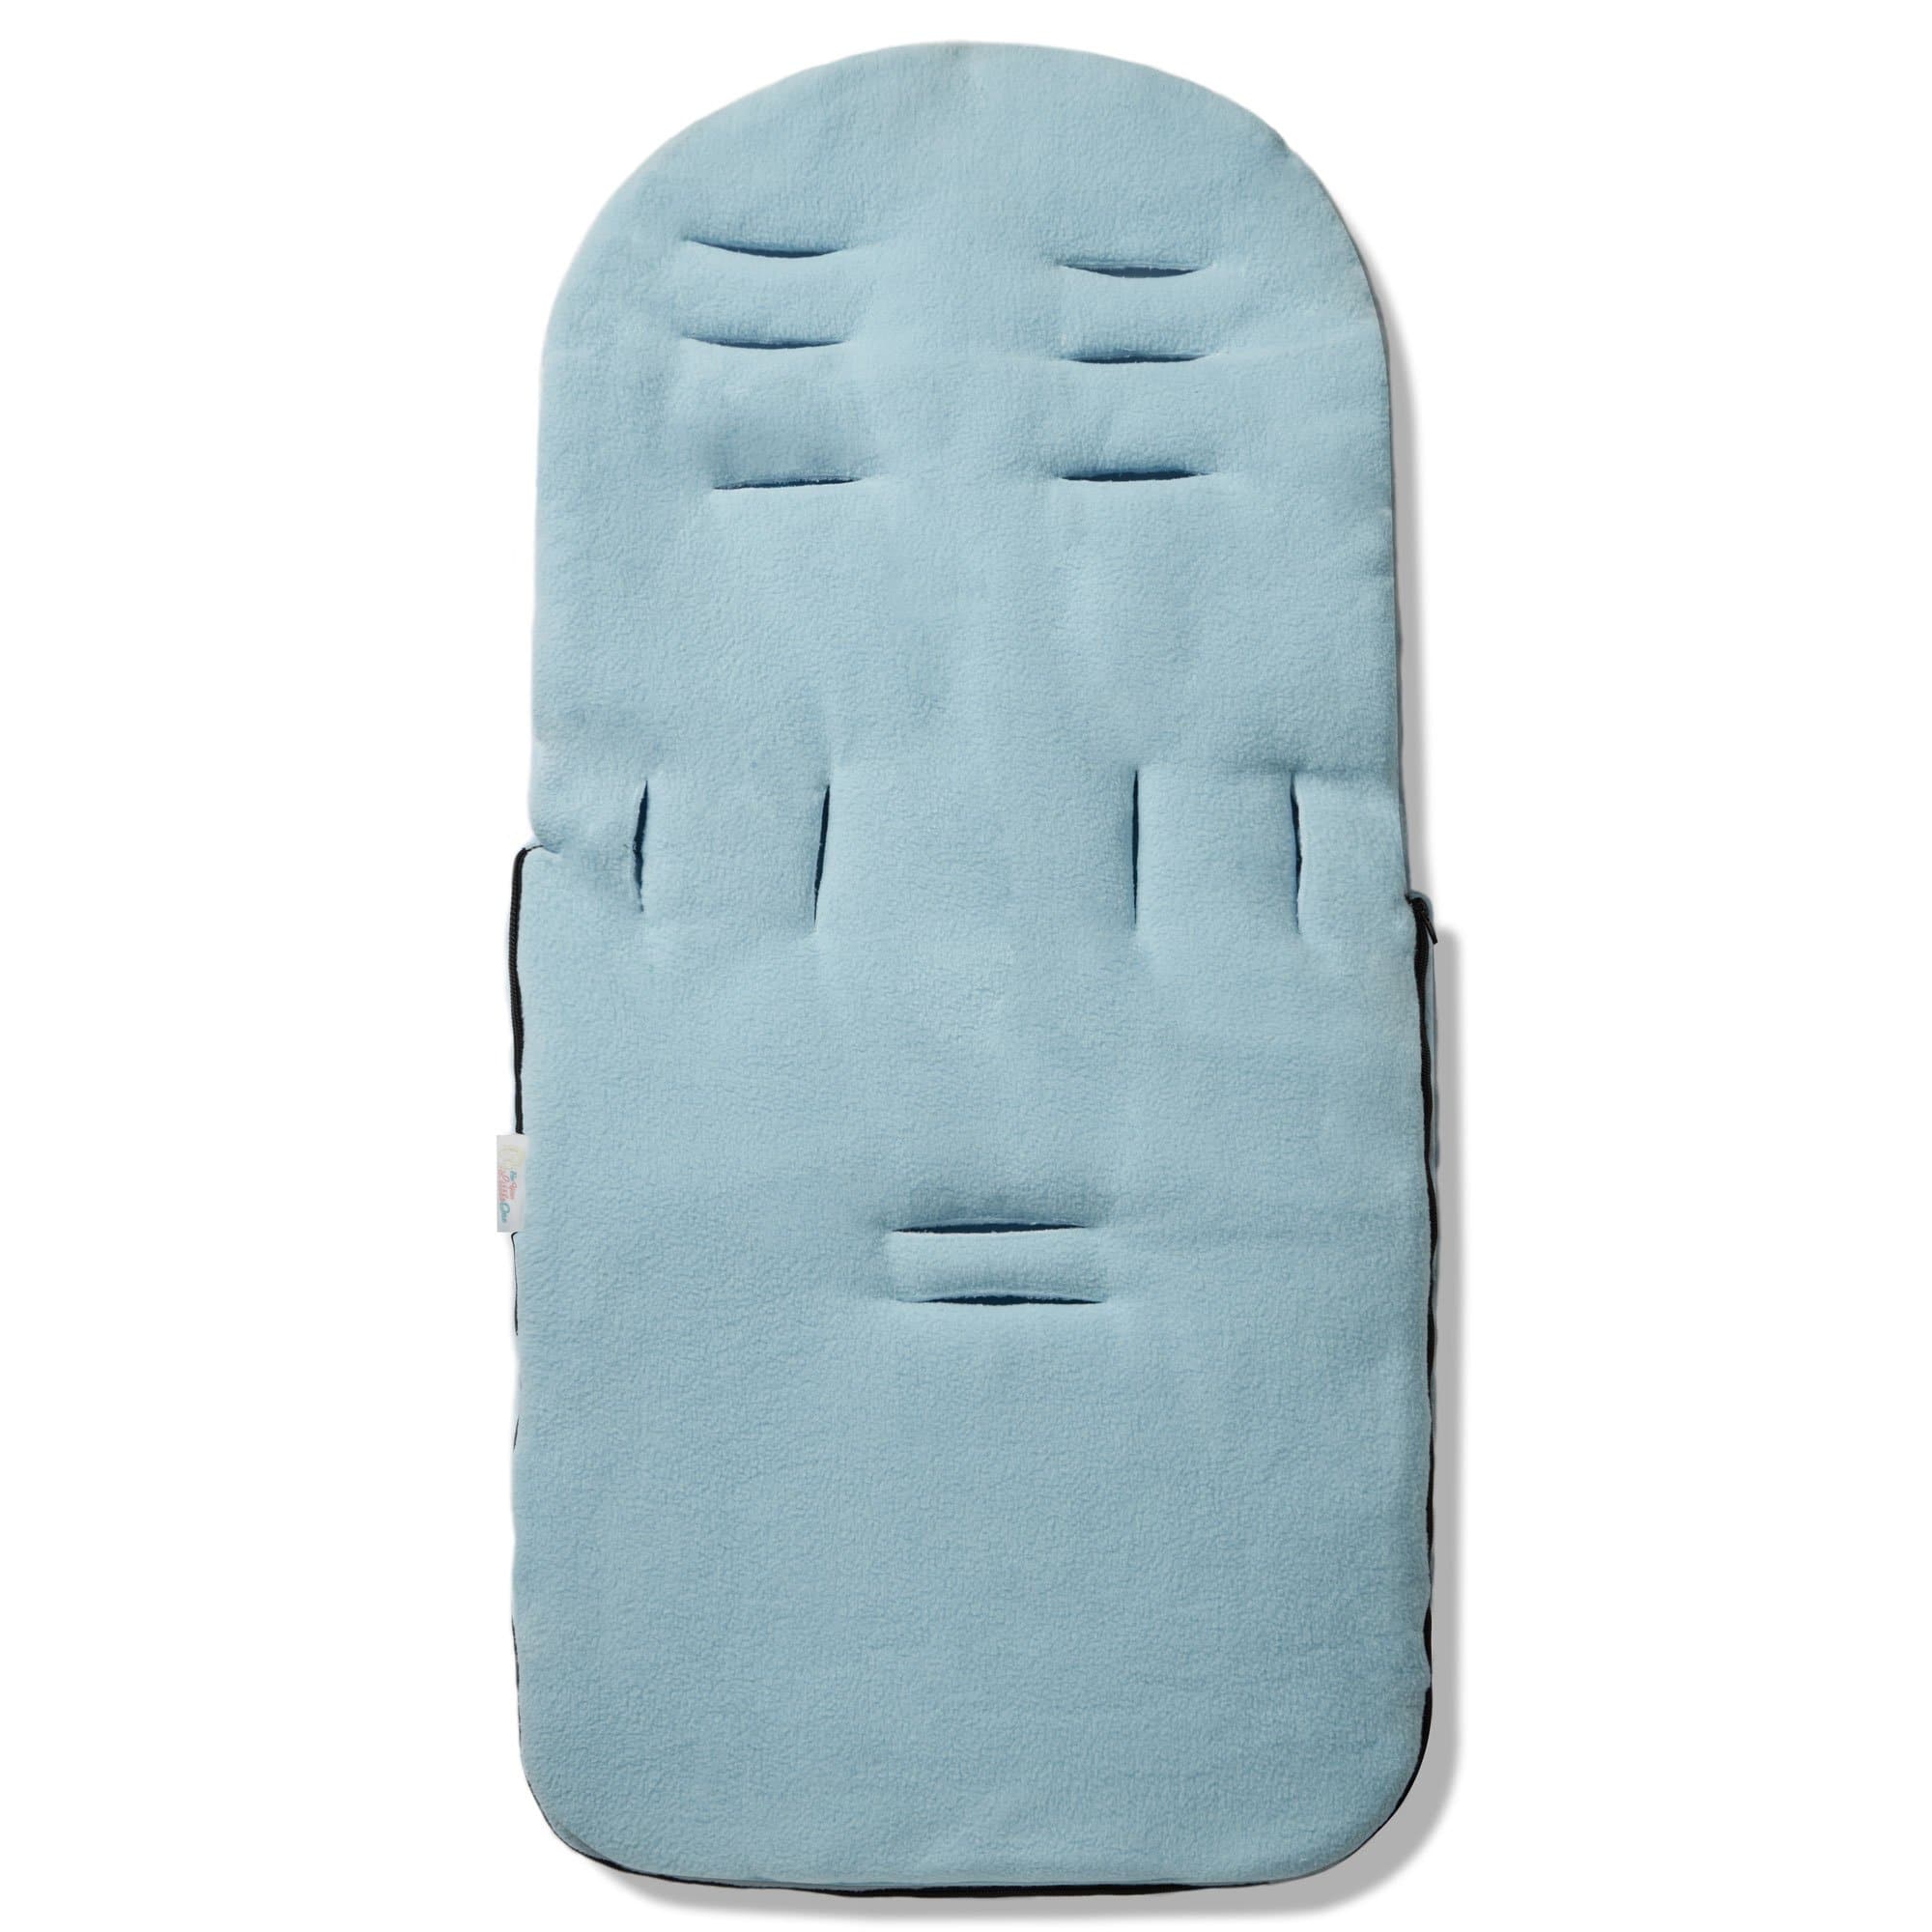 Dimple Footmuff / Cosy Toes Compatible with Peg Perego - For Your Little One